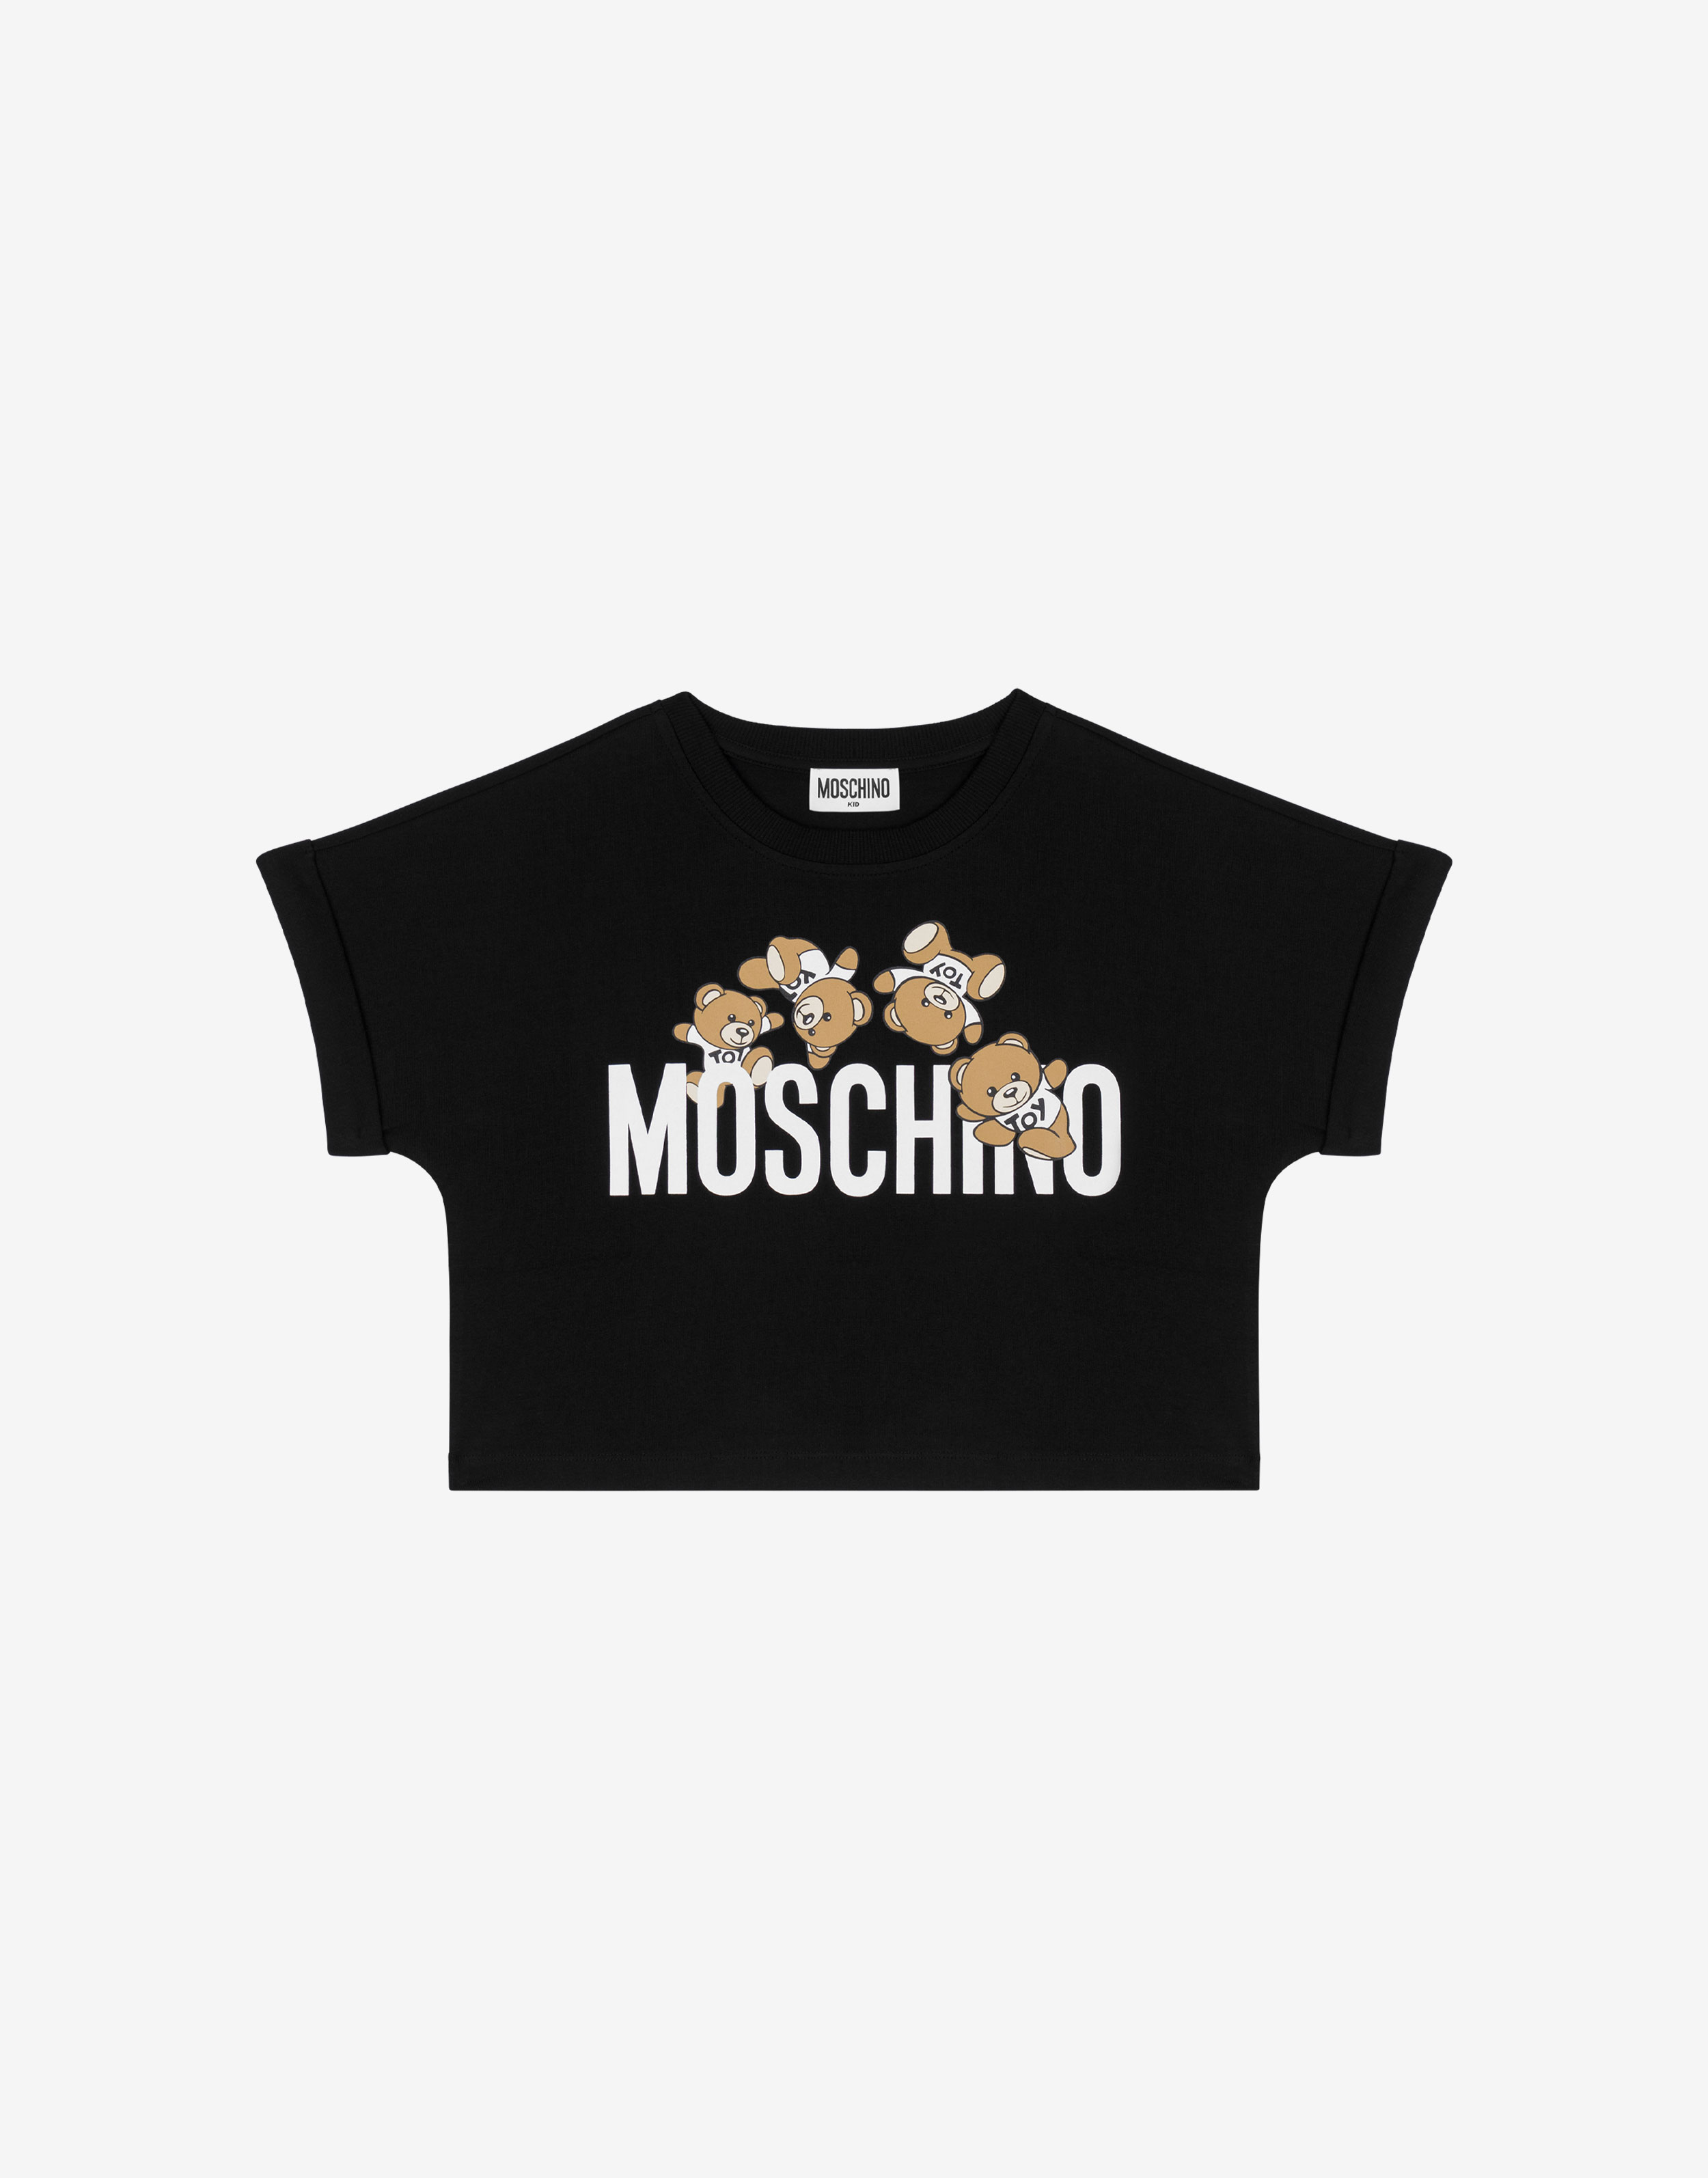 Moschino Shirts & Tops for Women - Official Store